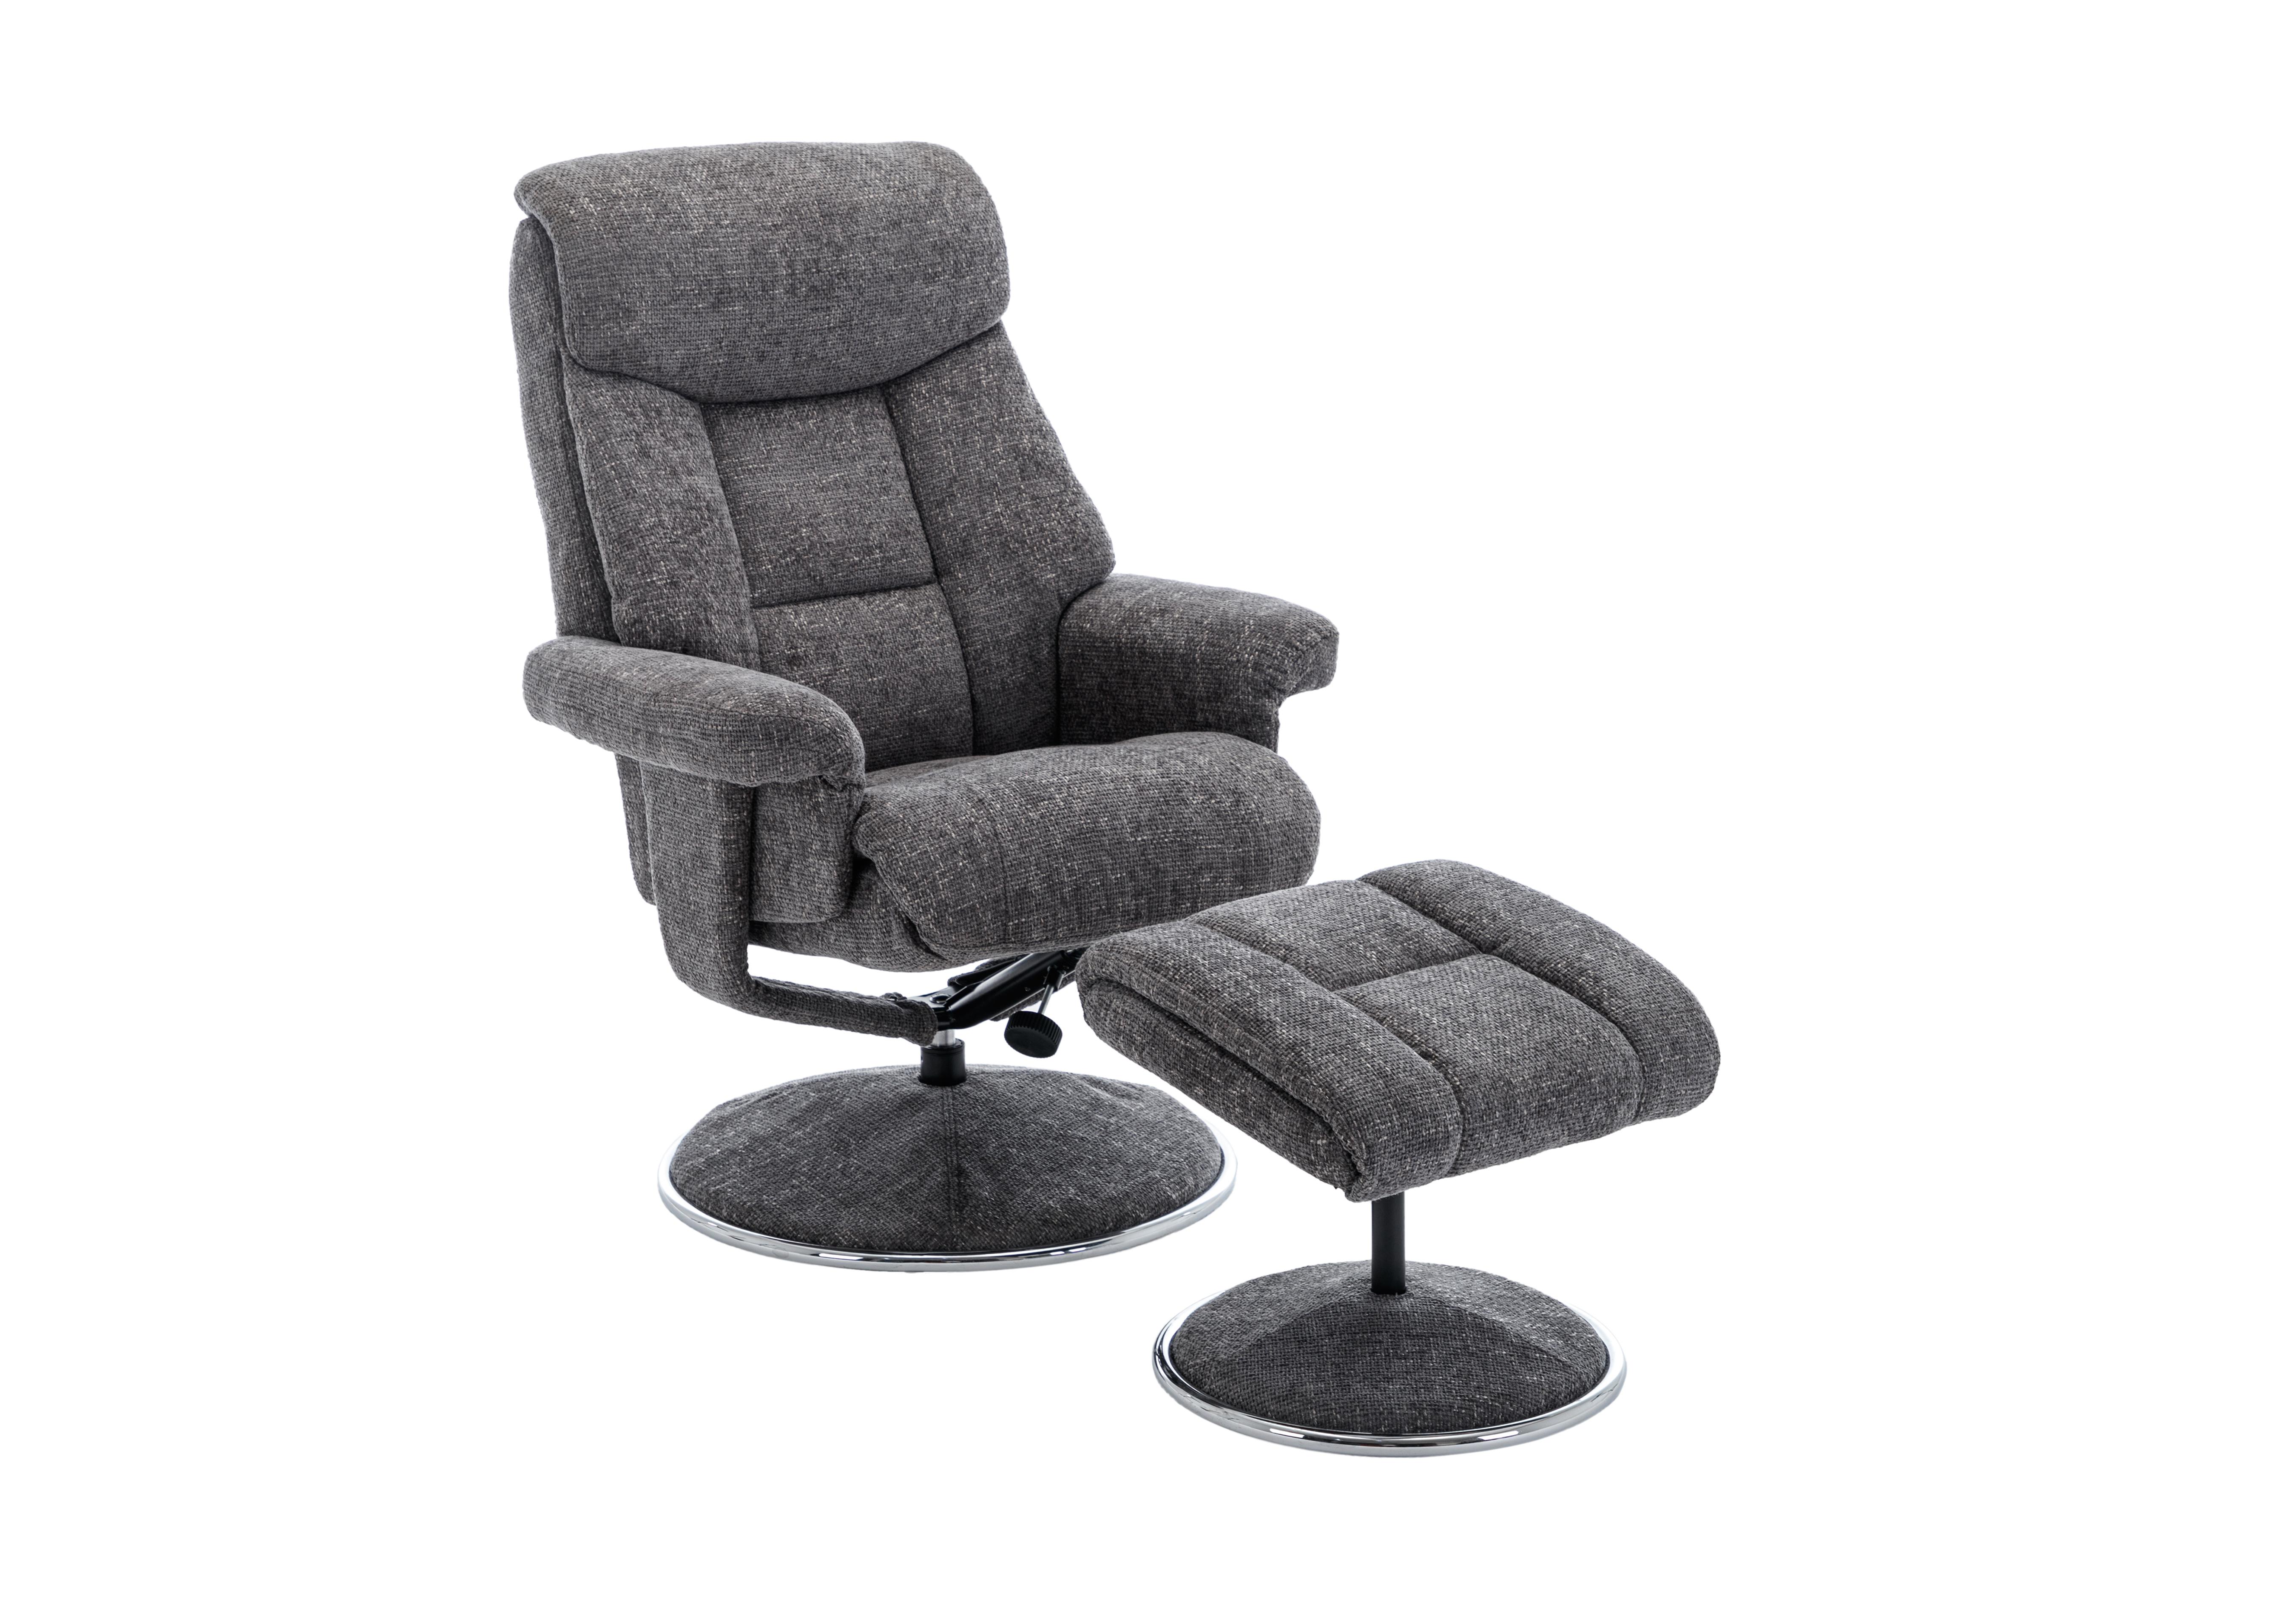 Bruges Fabric Swivel Chair and Footstool in Biarritz Flint on Furniture Village